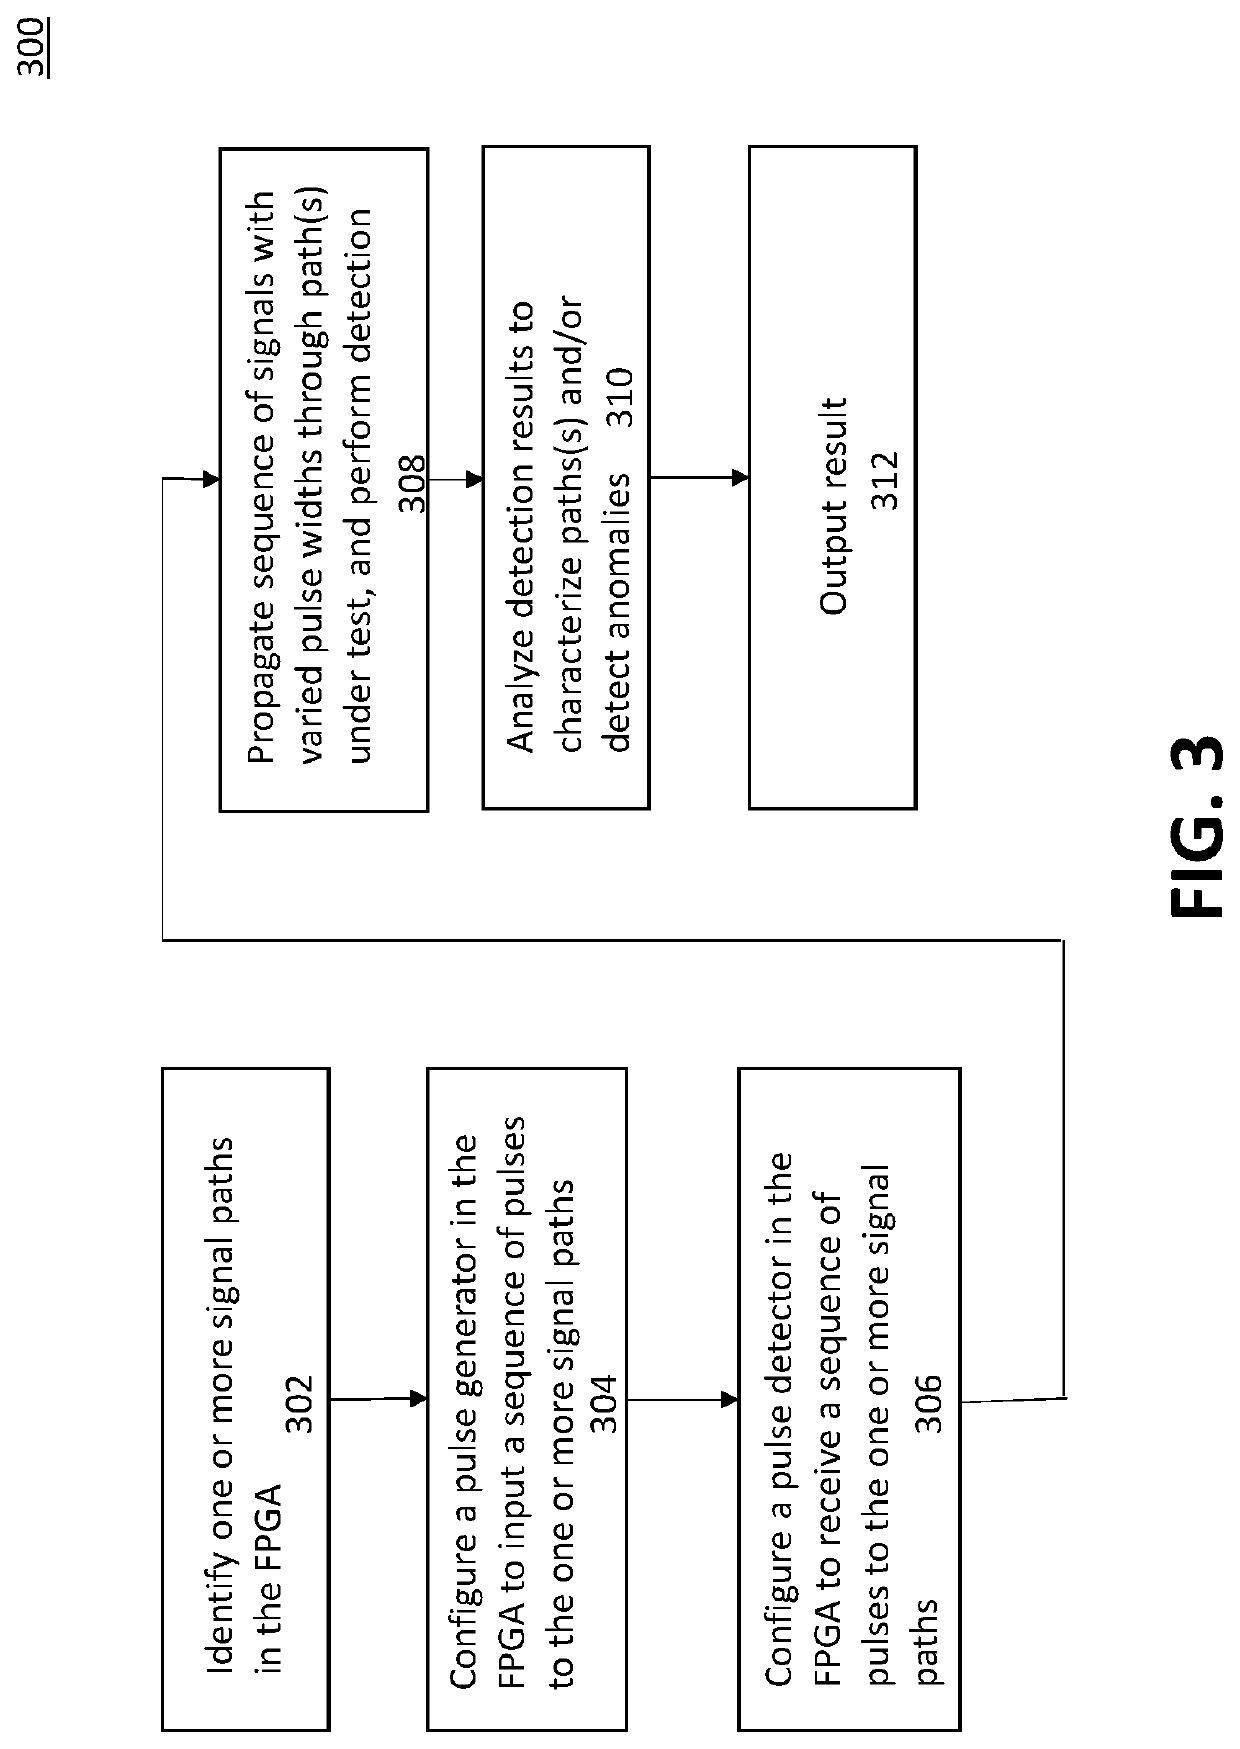 Systems and/or methods for anomaly detection and characterization in integrated circuits